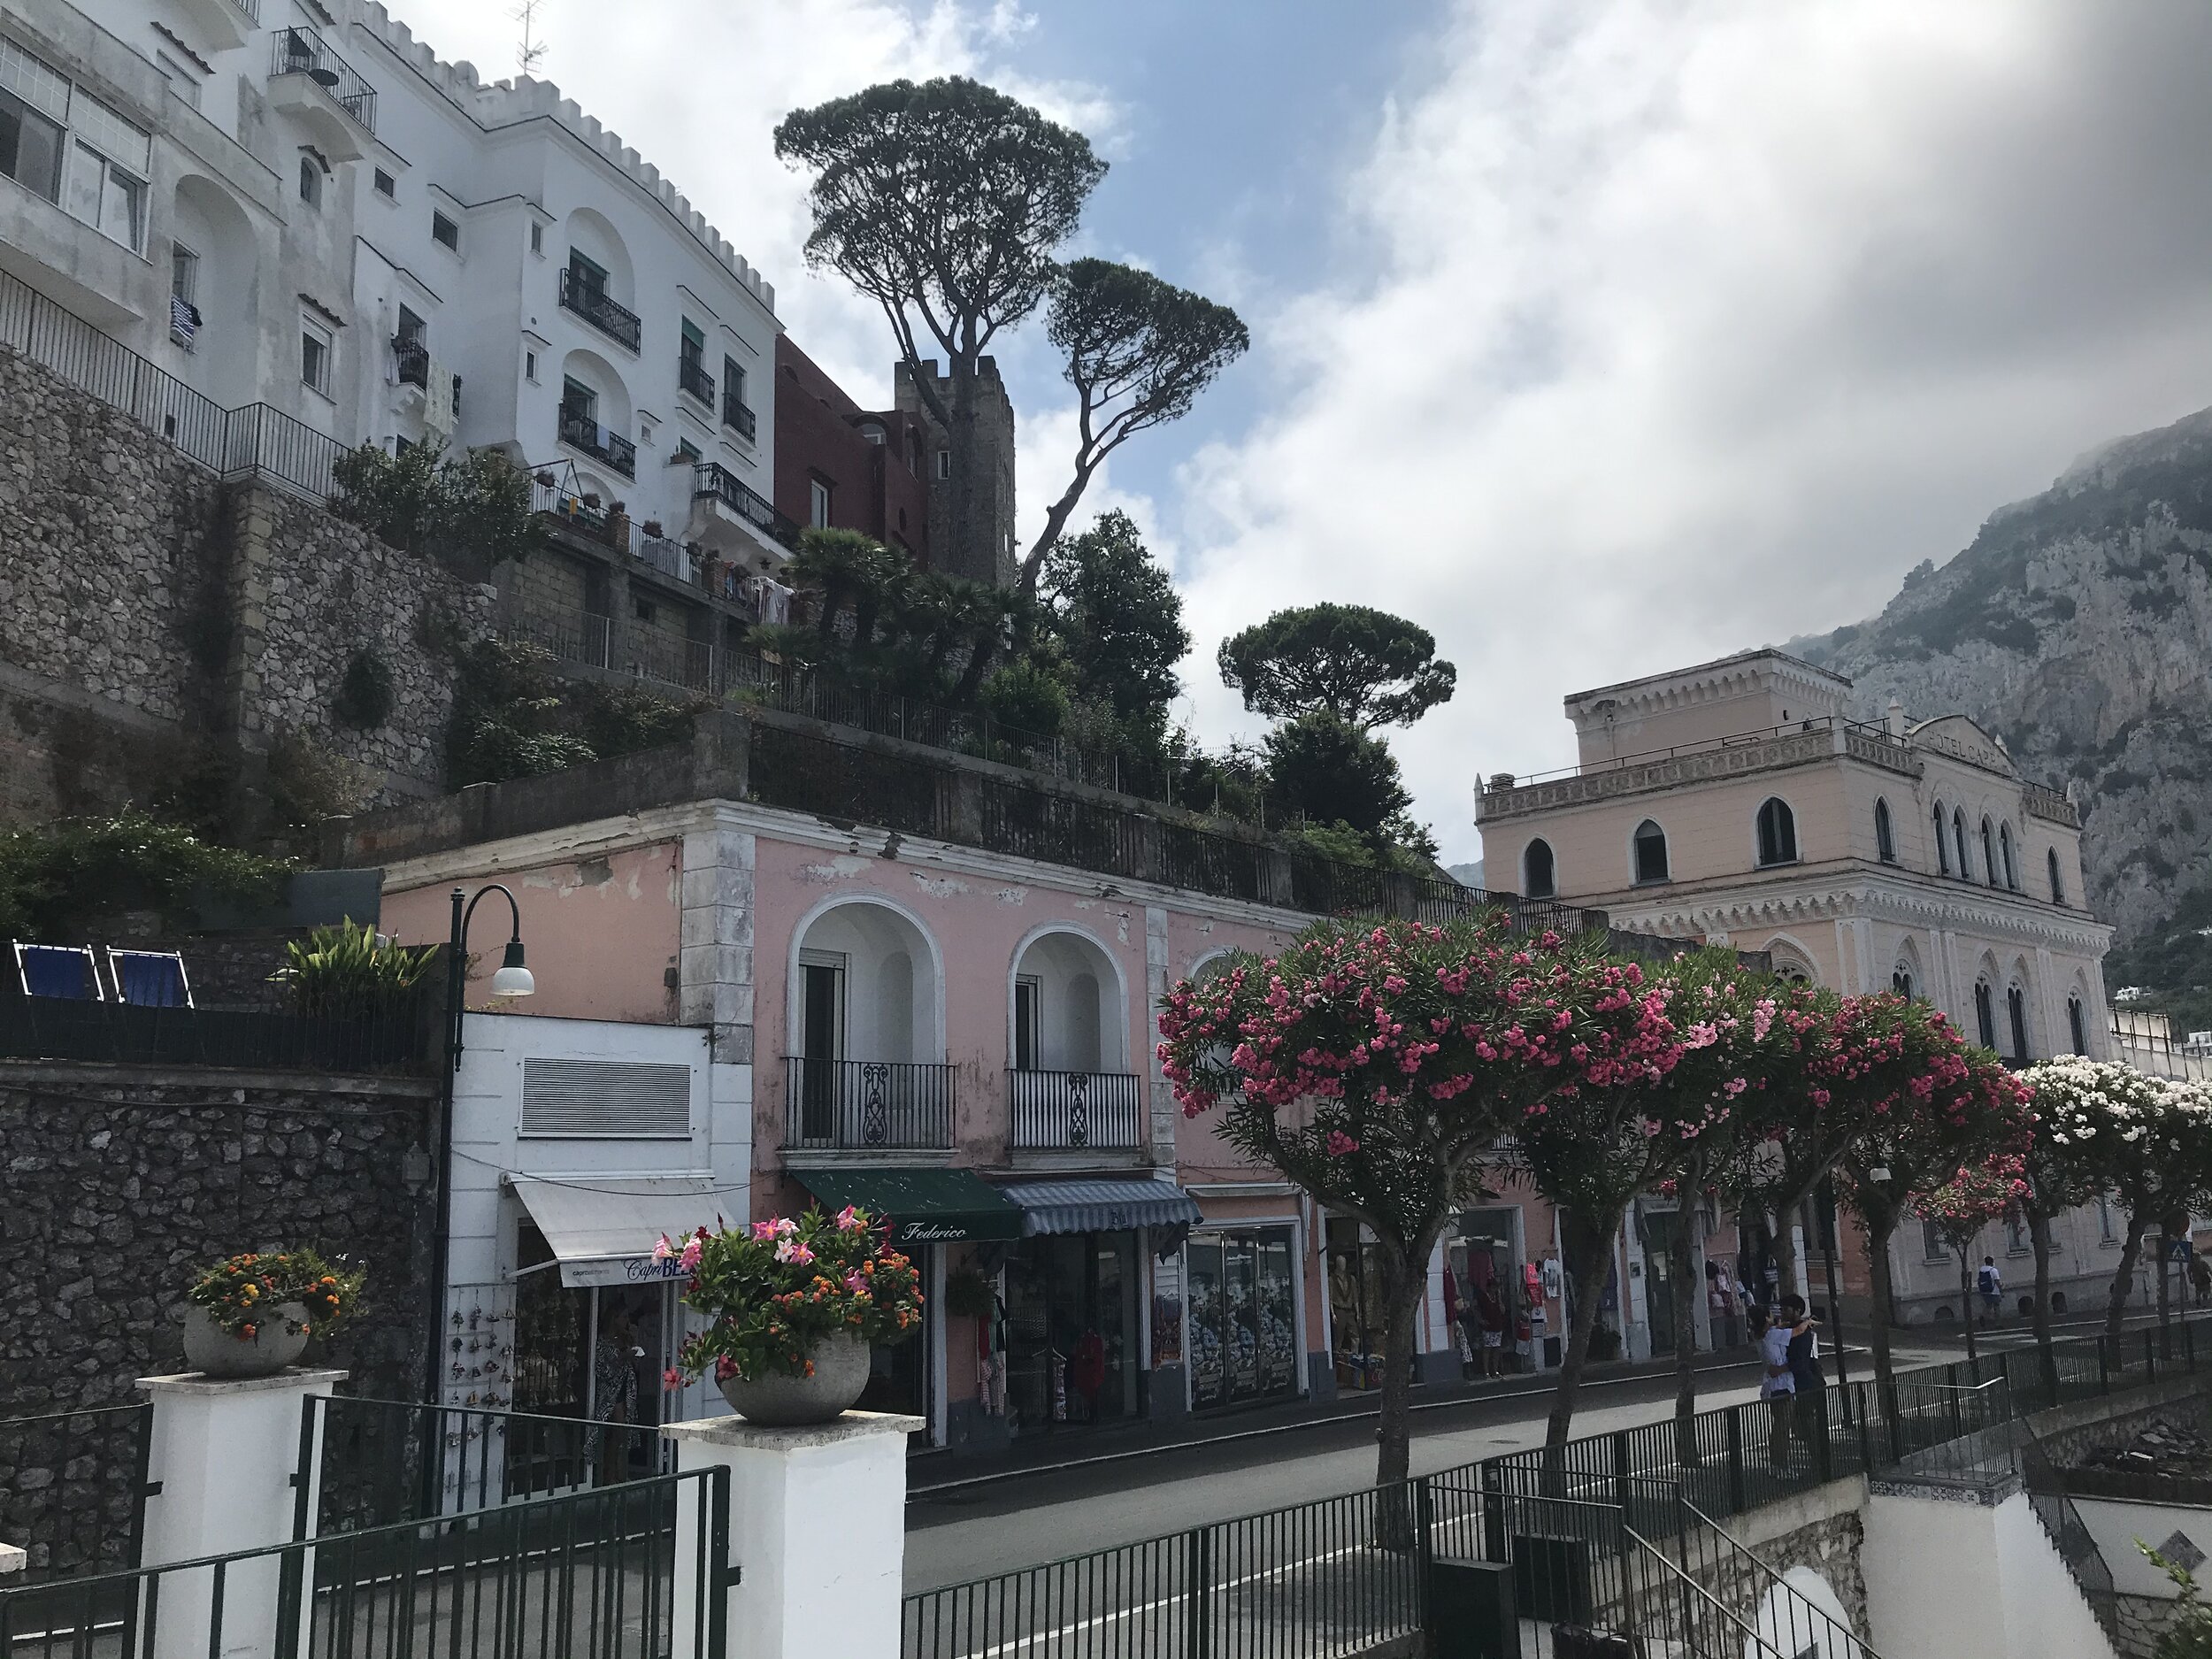  CAPRI, Napoli. August 4th, 2020. PICTURED: Shops fill the rose-colored arcade in the town center of Capri as clouds briefly roll in to give respite from the blazing sun. 